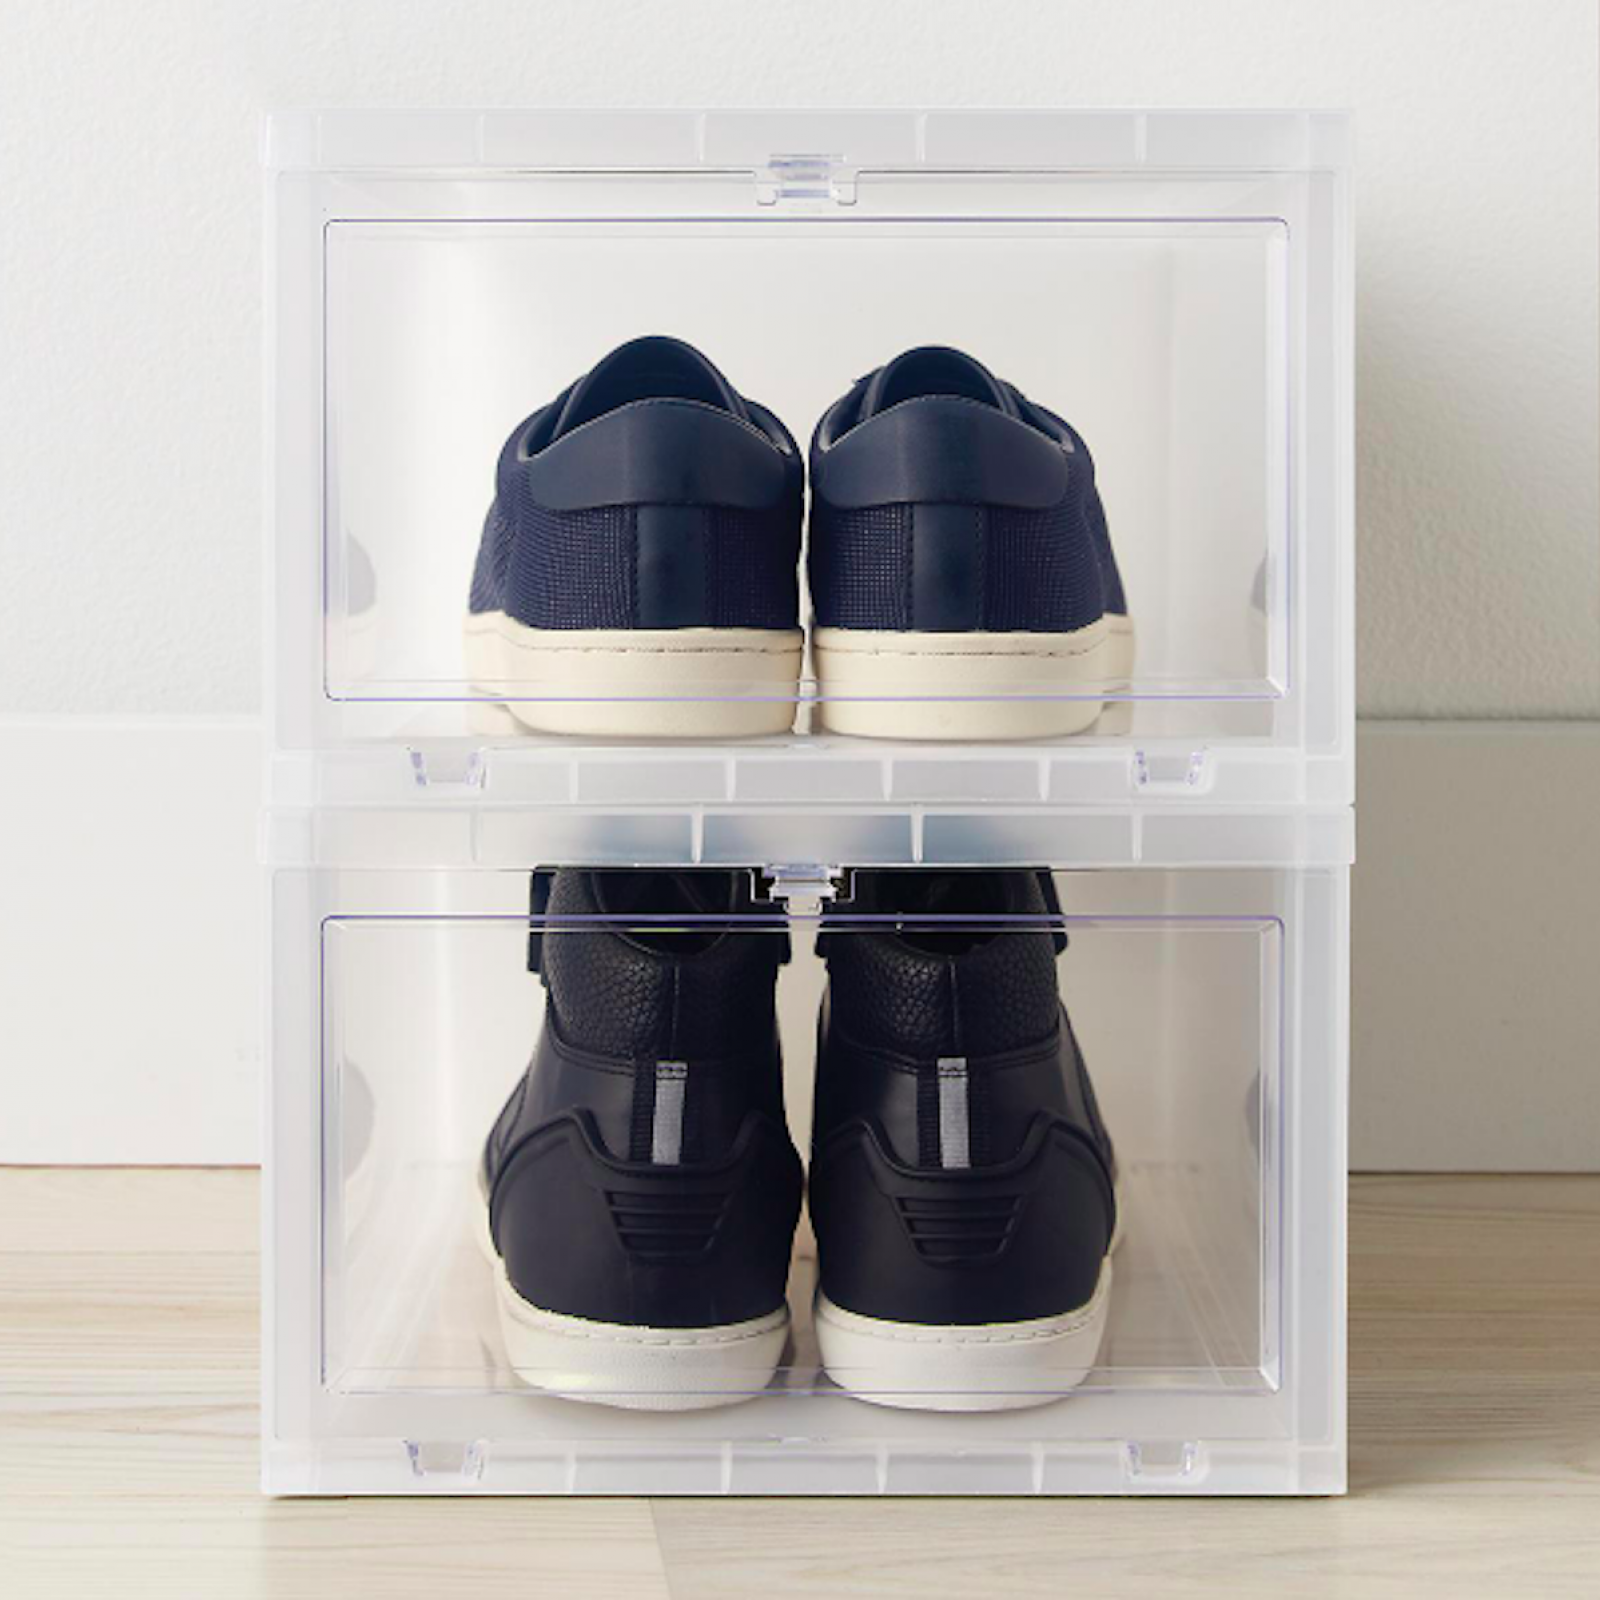 3 Container Store Organizers That Saved My Desk from Clutter